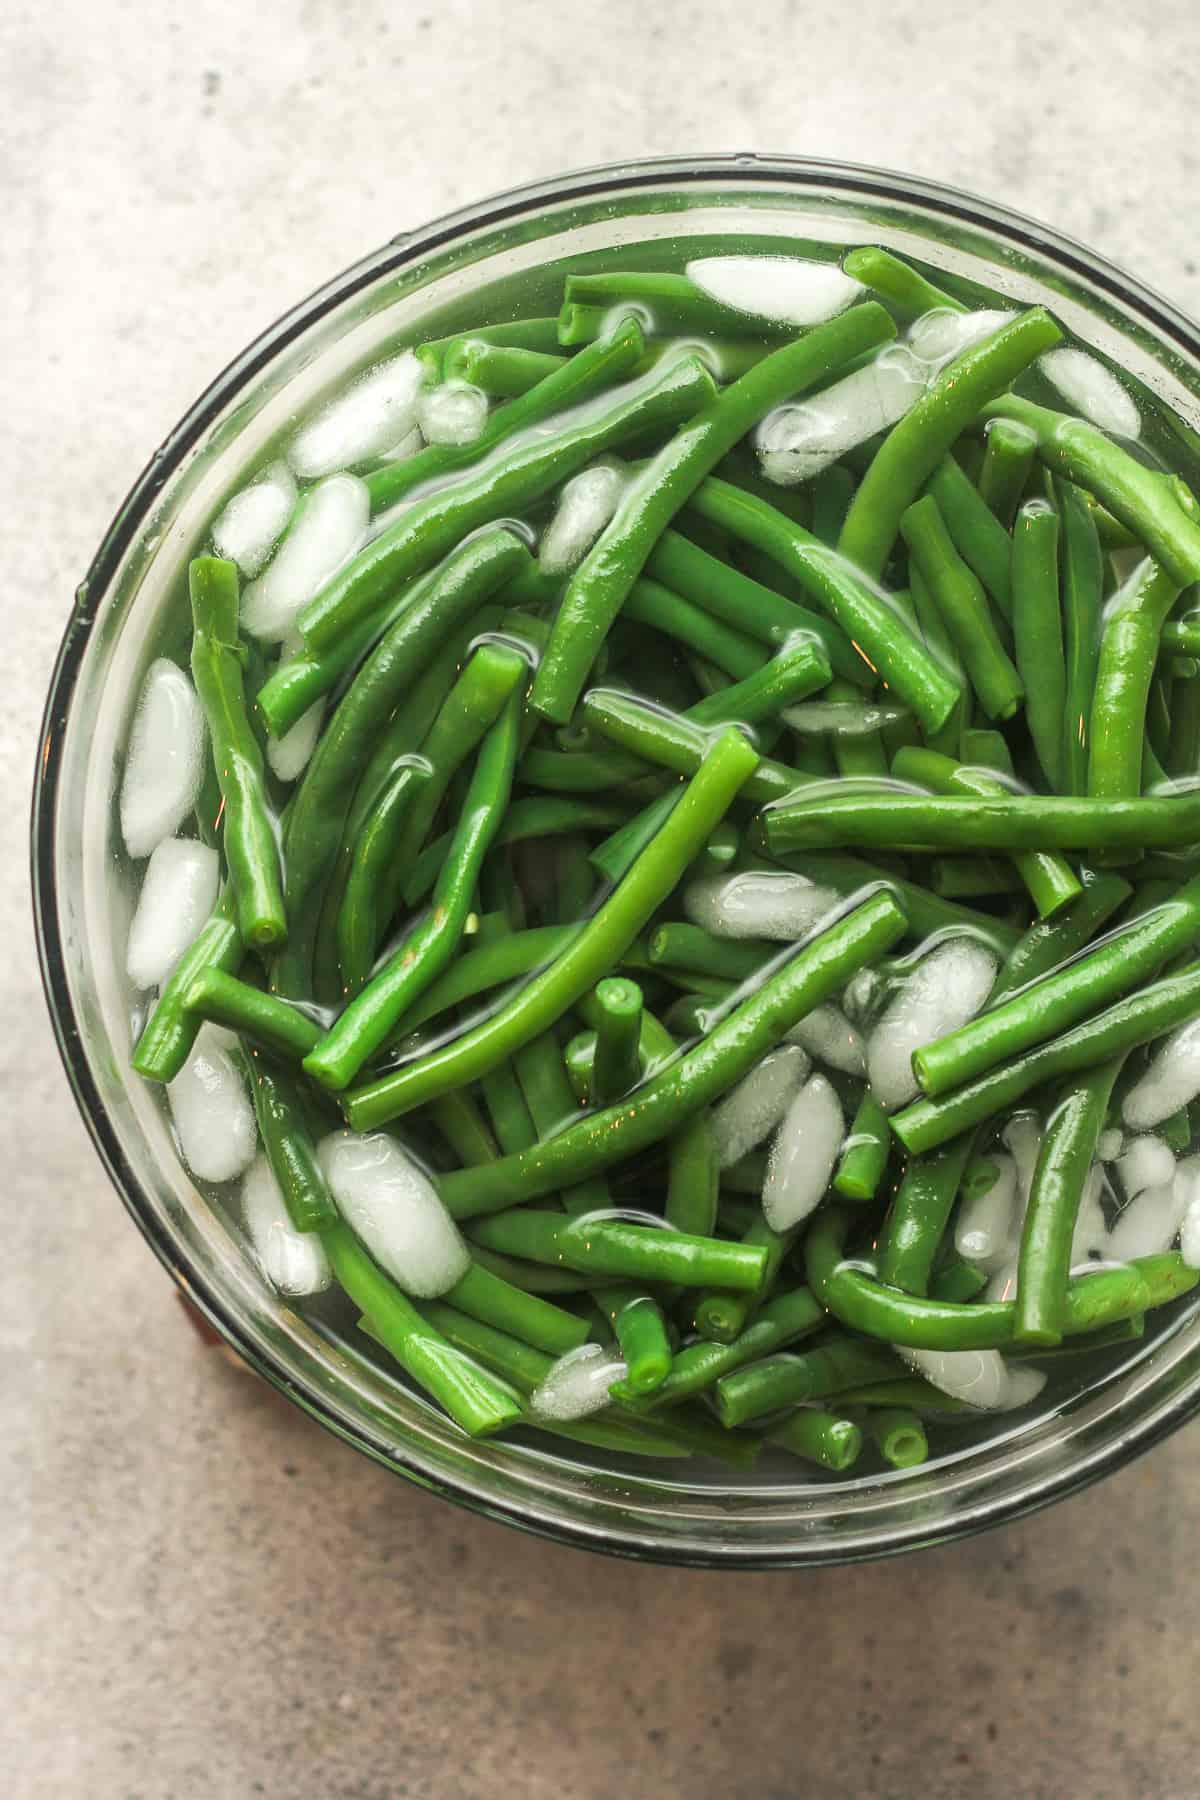 A large bowl of blanched green beans in an ice bath.